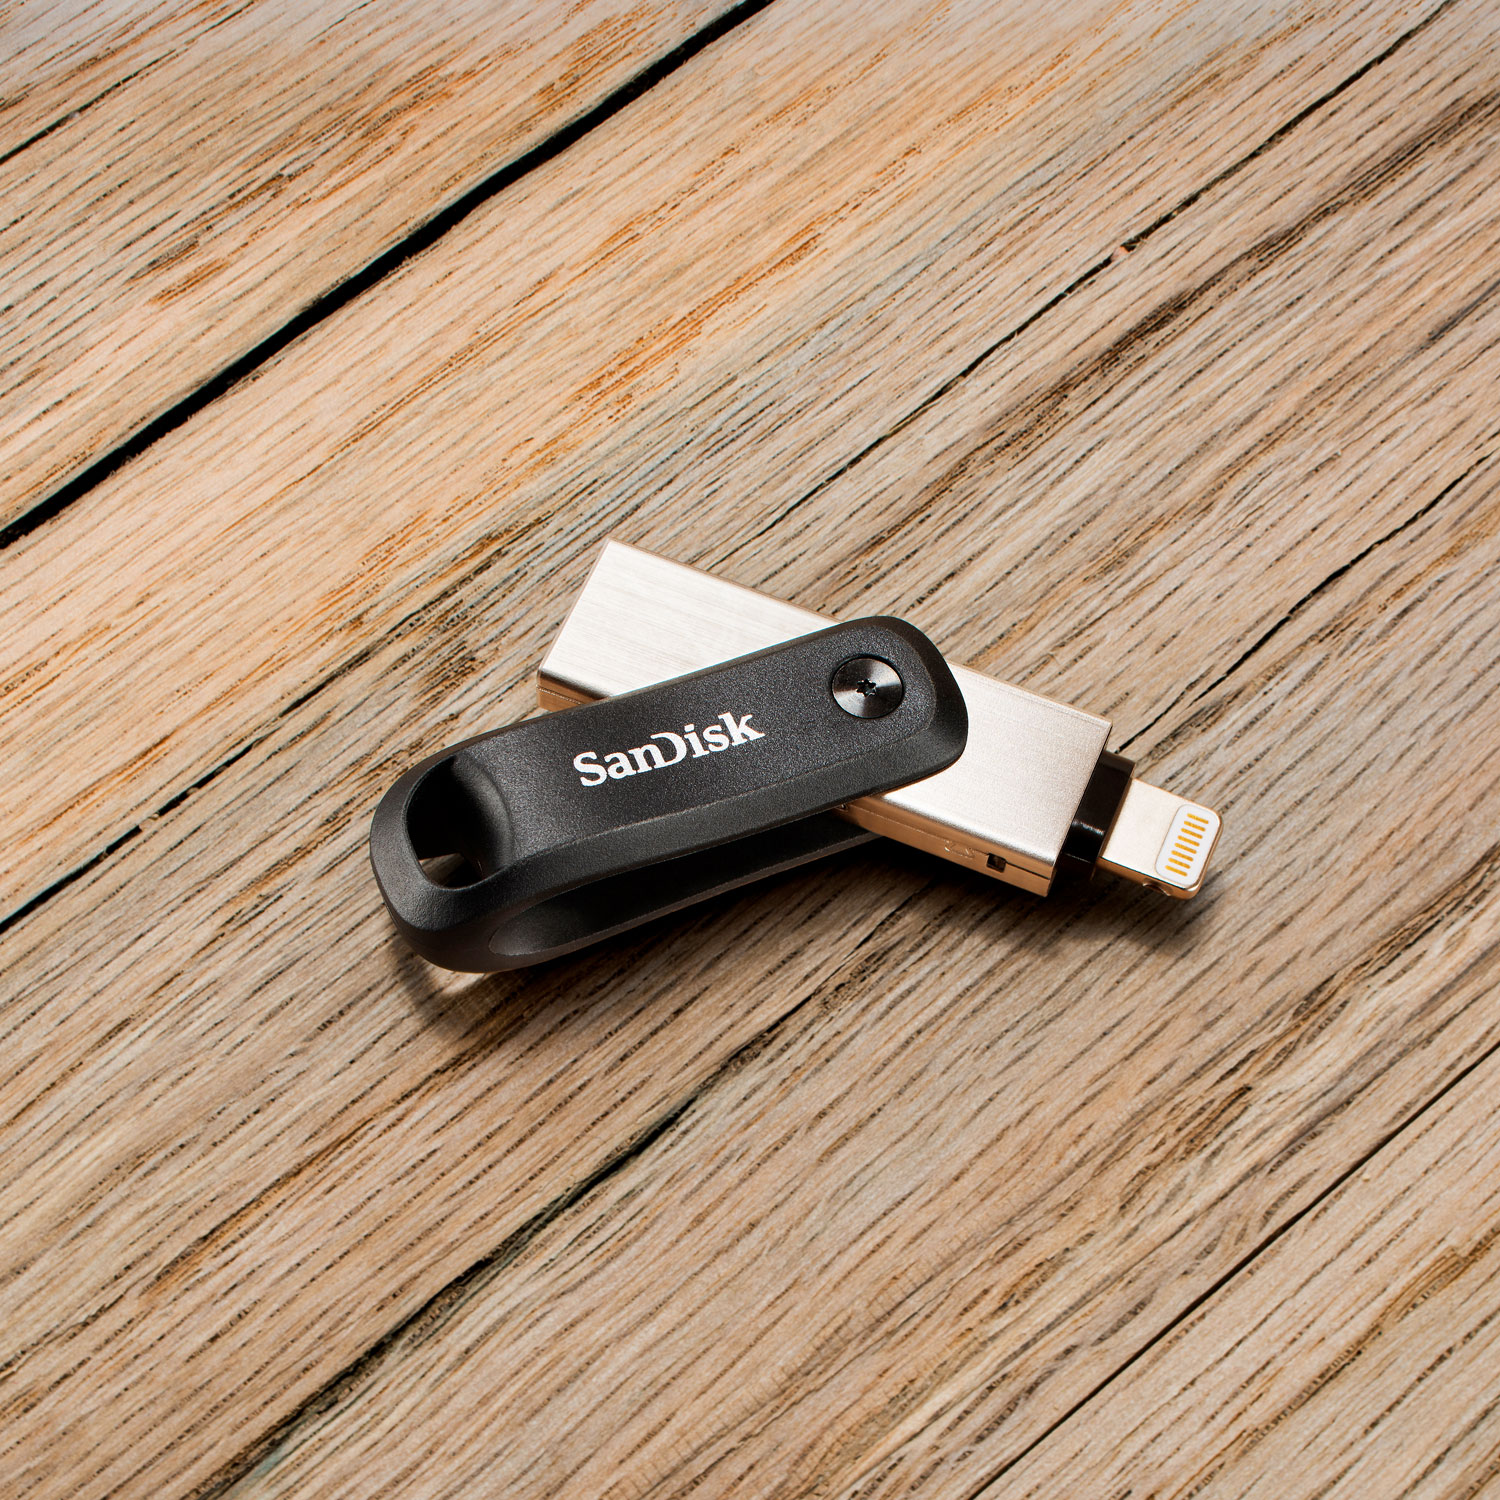 Sandisk iXpand Luxe 2-in-1 - Clé Lightning & USB Type-C Pour